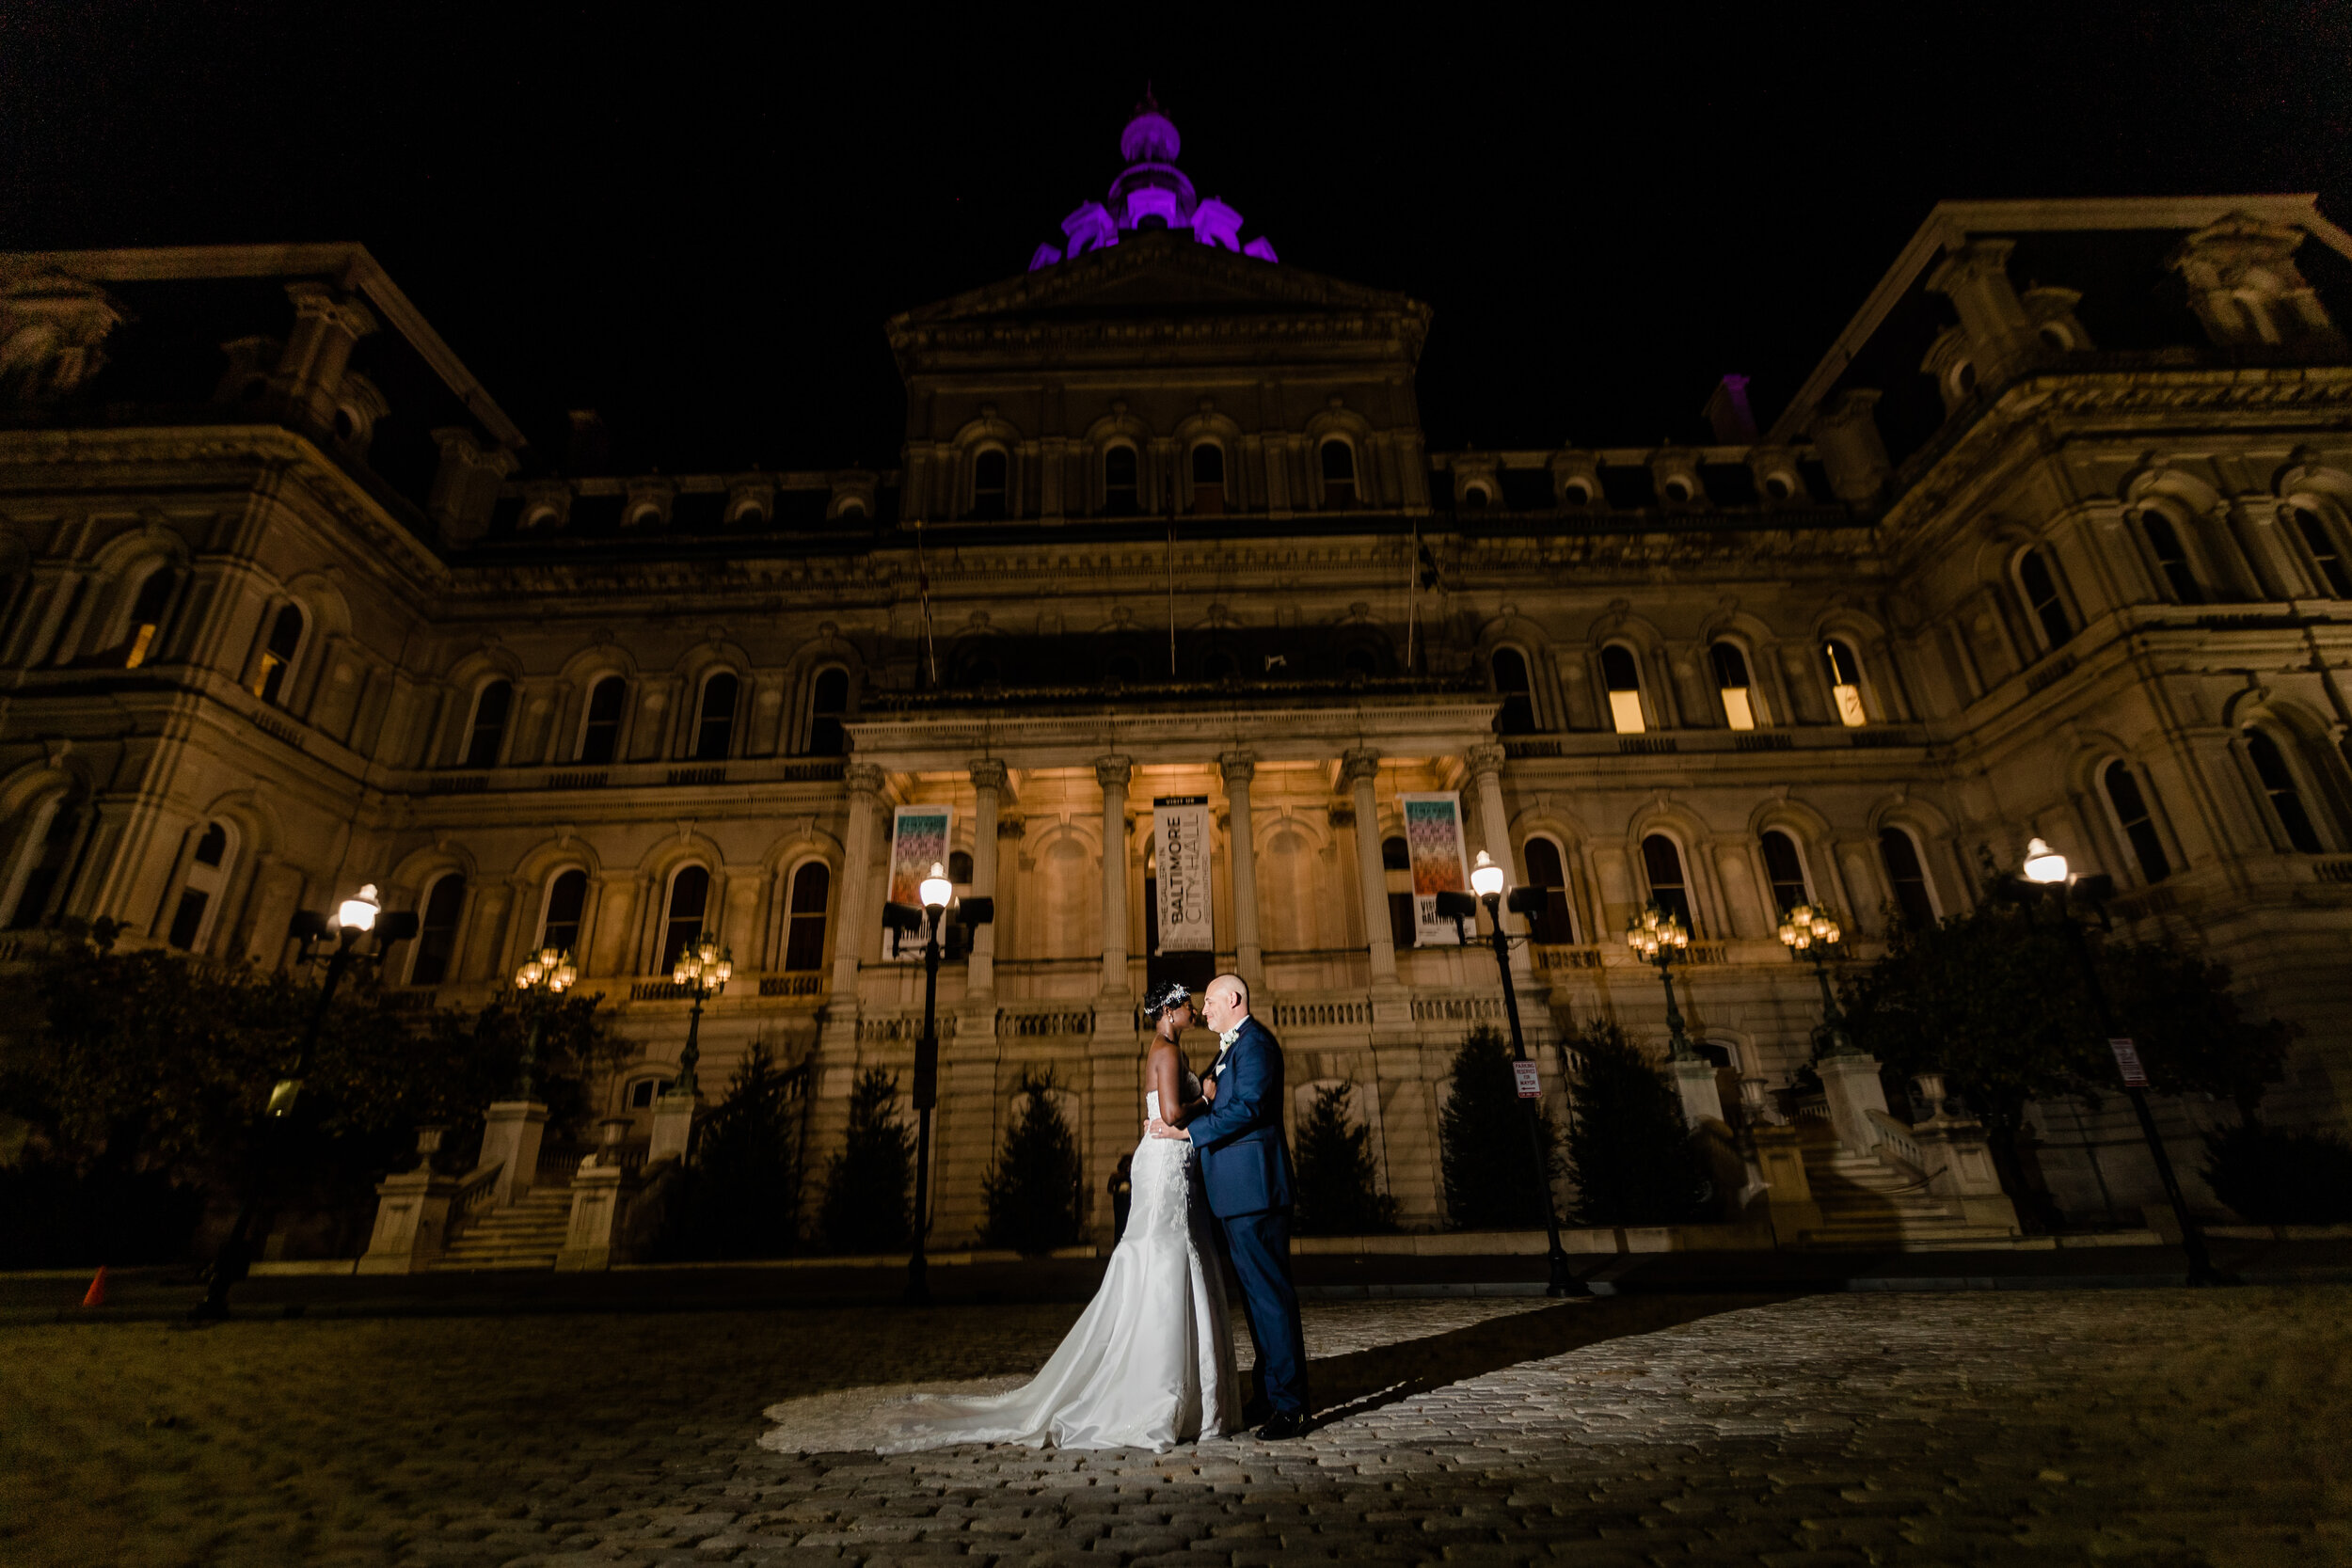 get married in baltimore city hall shot by megapixels media biracial couple wedding photographers maryland-95.jpg